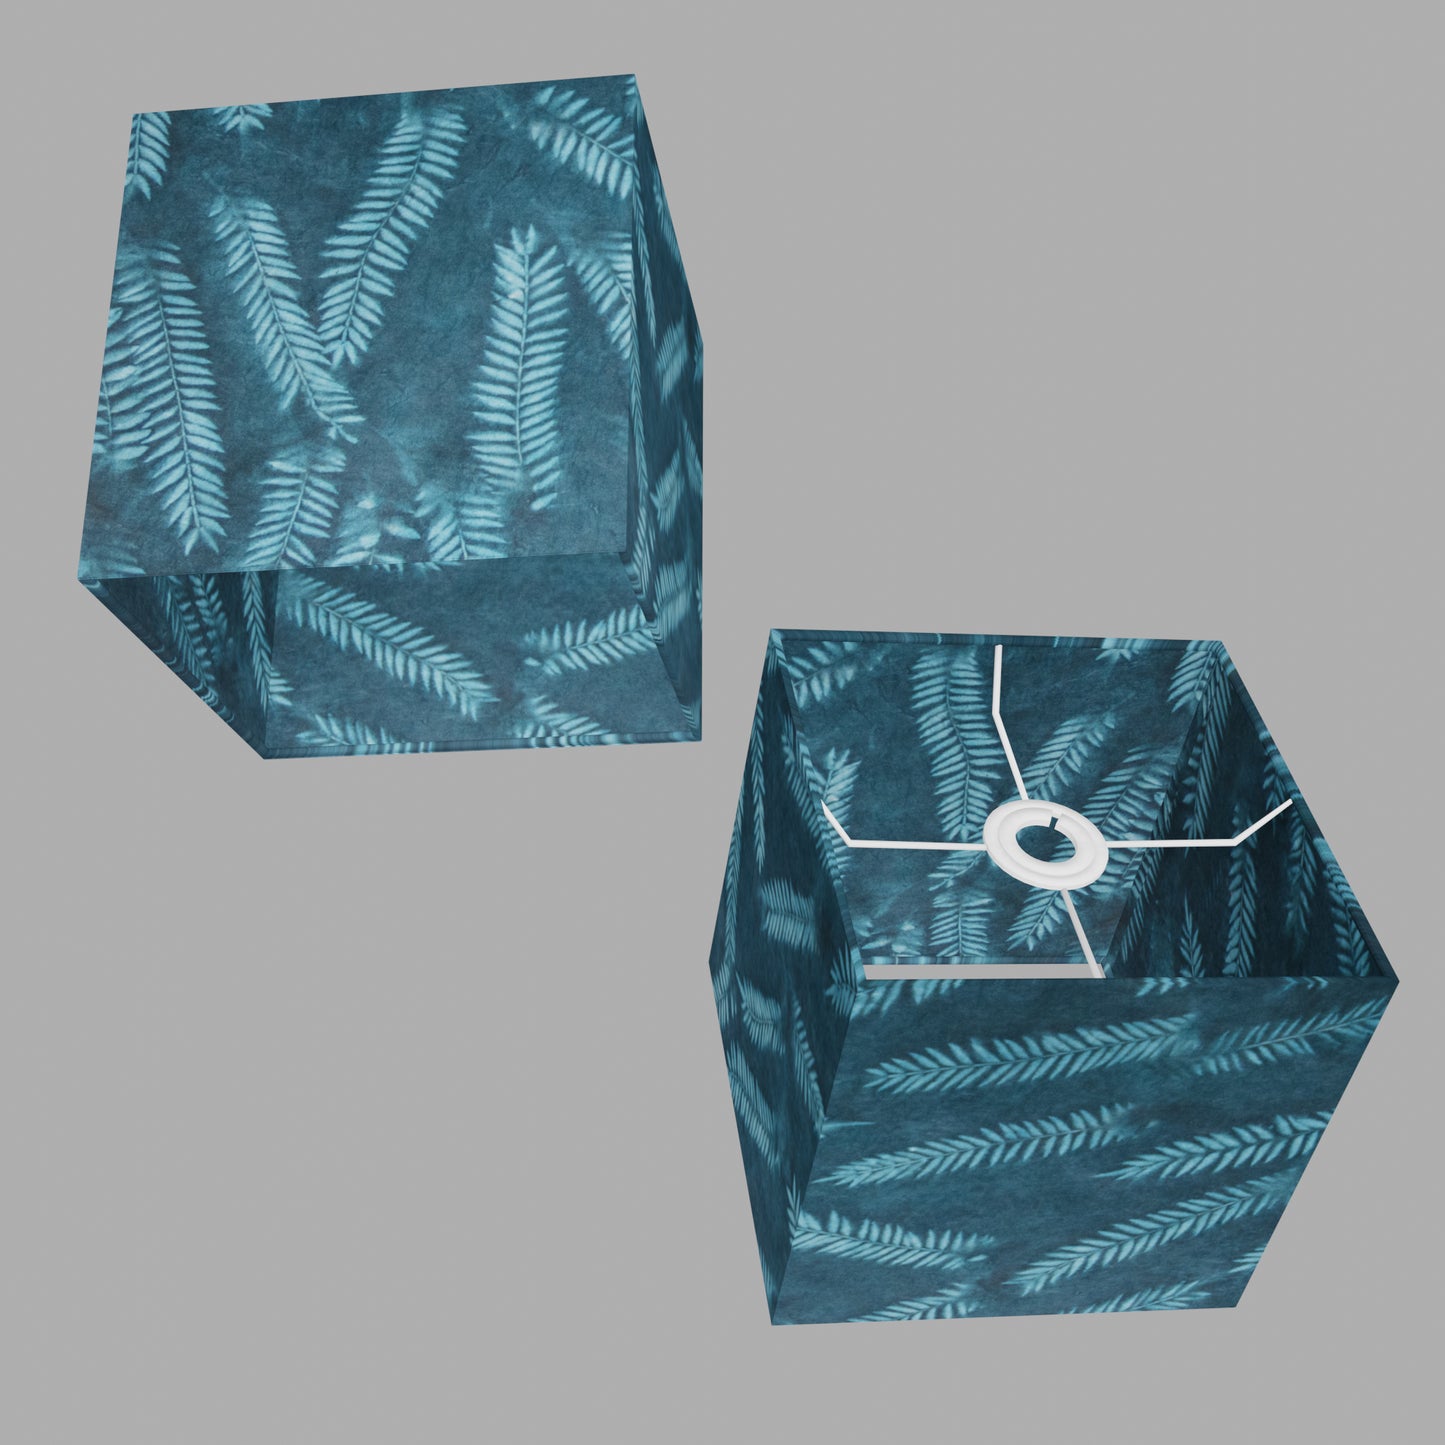 Square Lamp Shade - B106 ~ Resistance Dyed Teal Fern, 20cm(w) x 20cm(h) x 20cm(d)